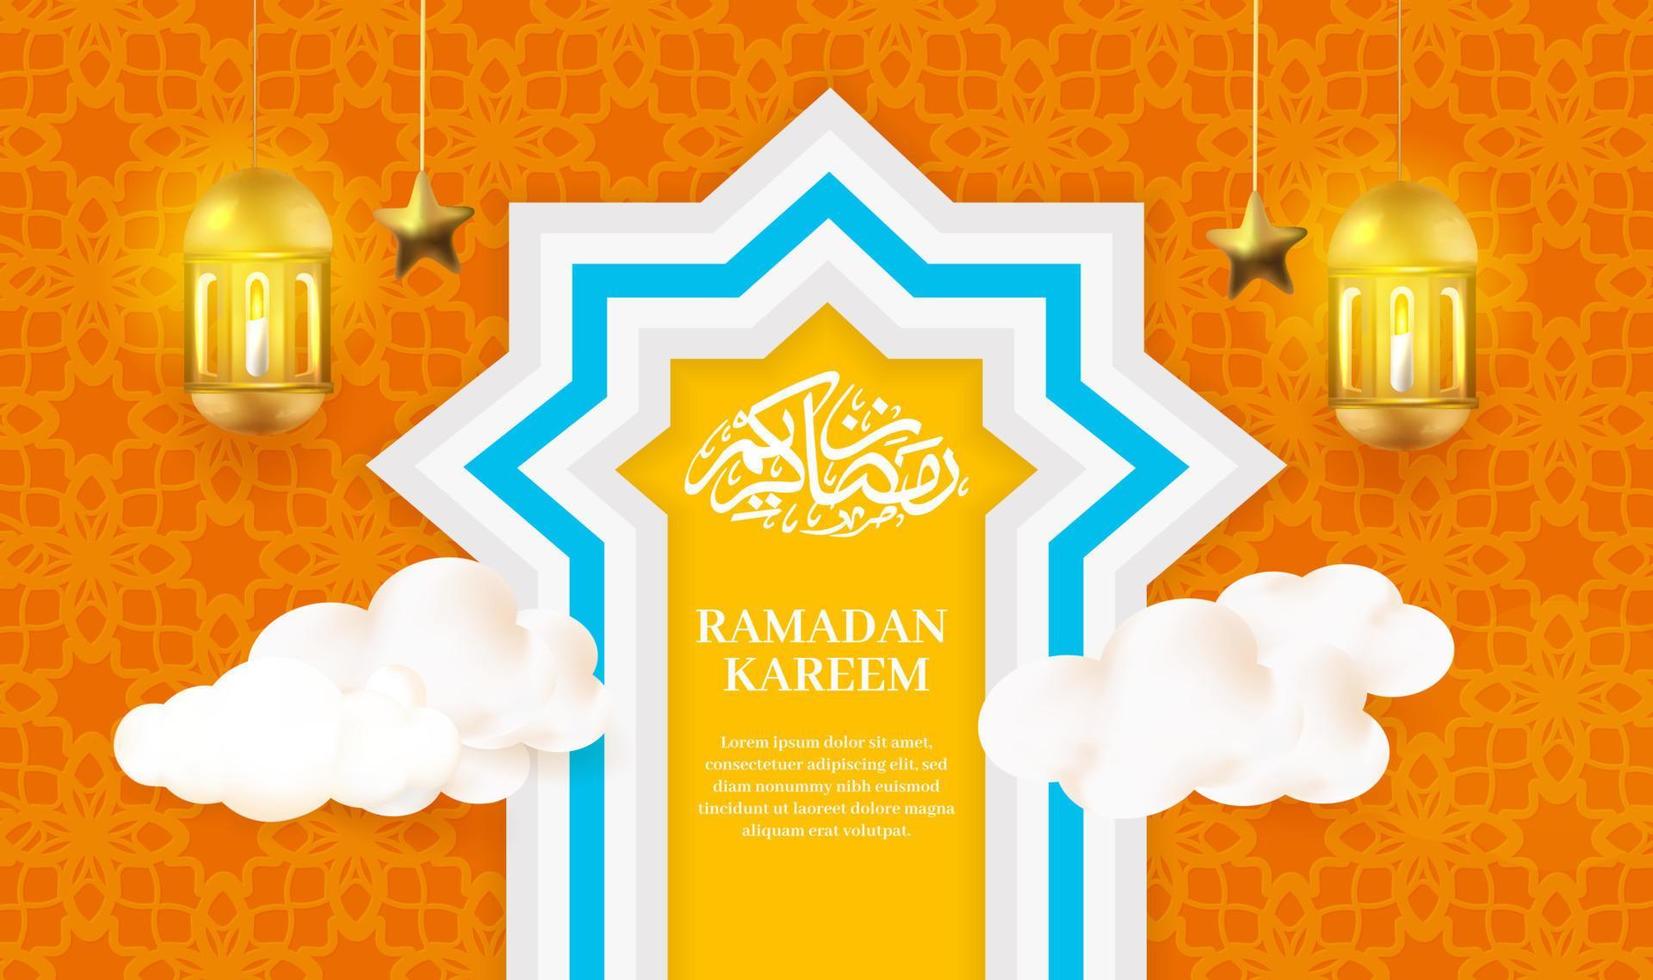 Ramadan kareem banners and greeting cards, with calligraphy, crescent moon and lanterns vector